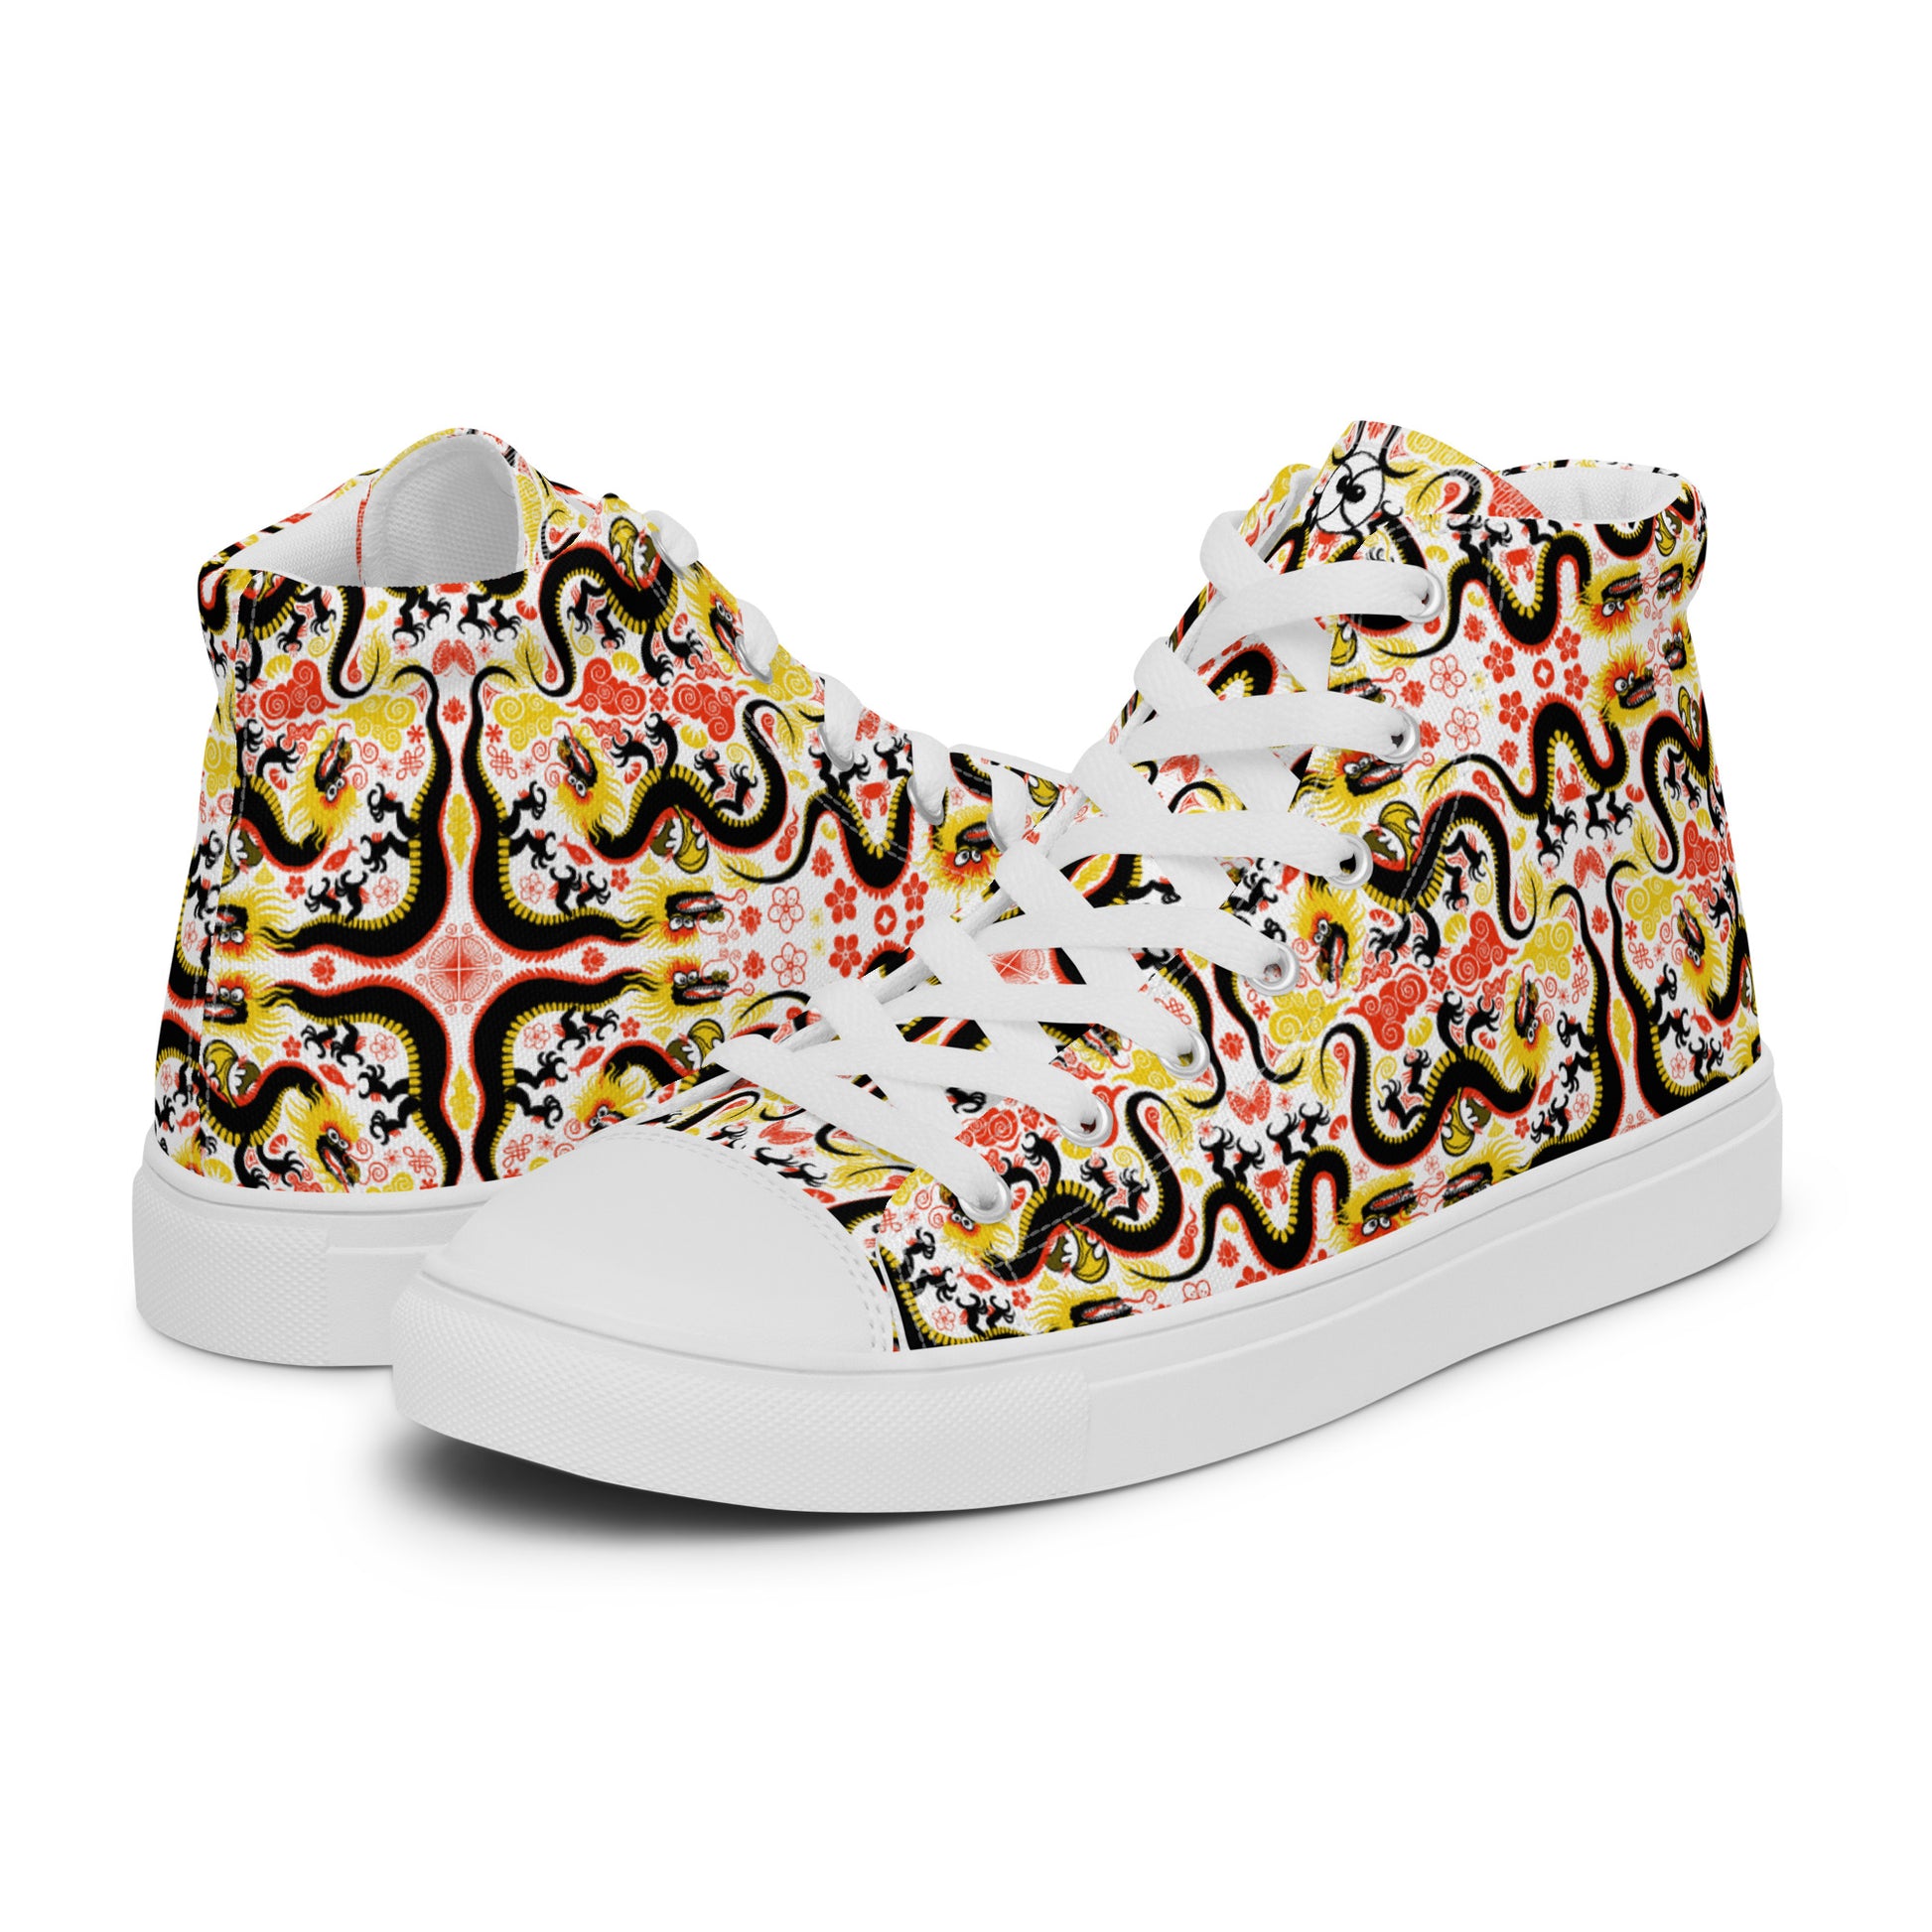 Legendary Chinese dragons pattern art Men’s high top canvas shoes. Overview